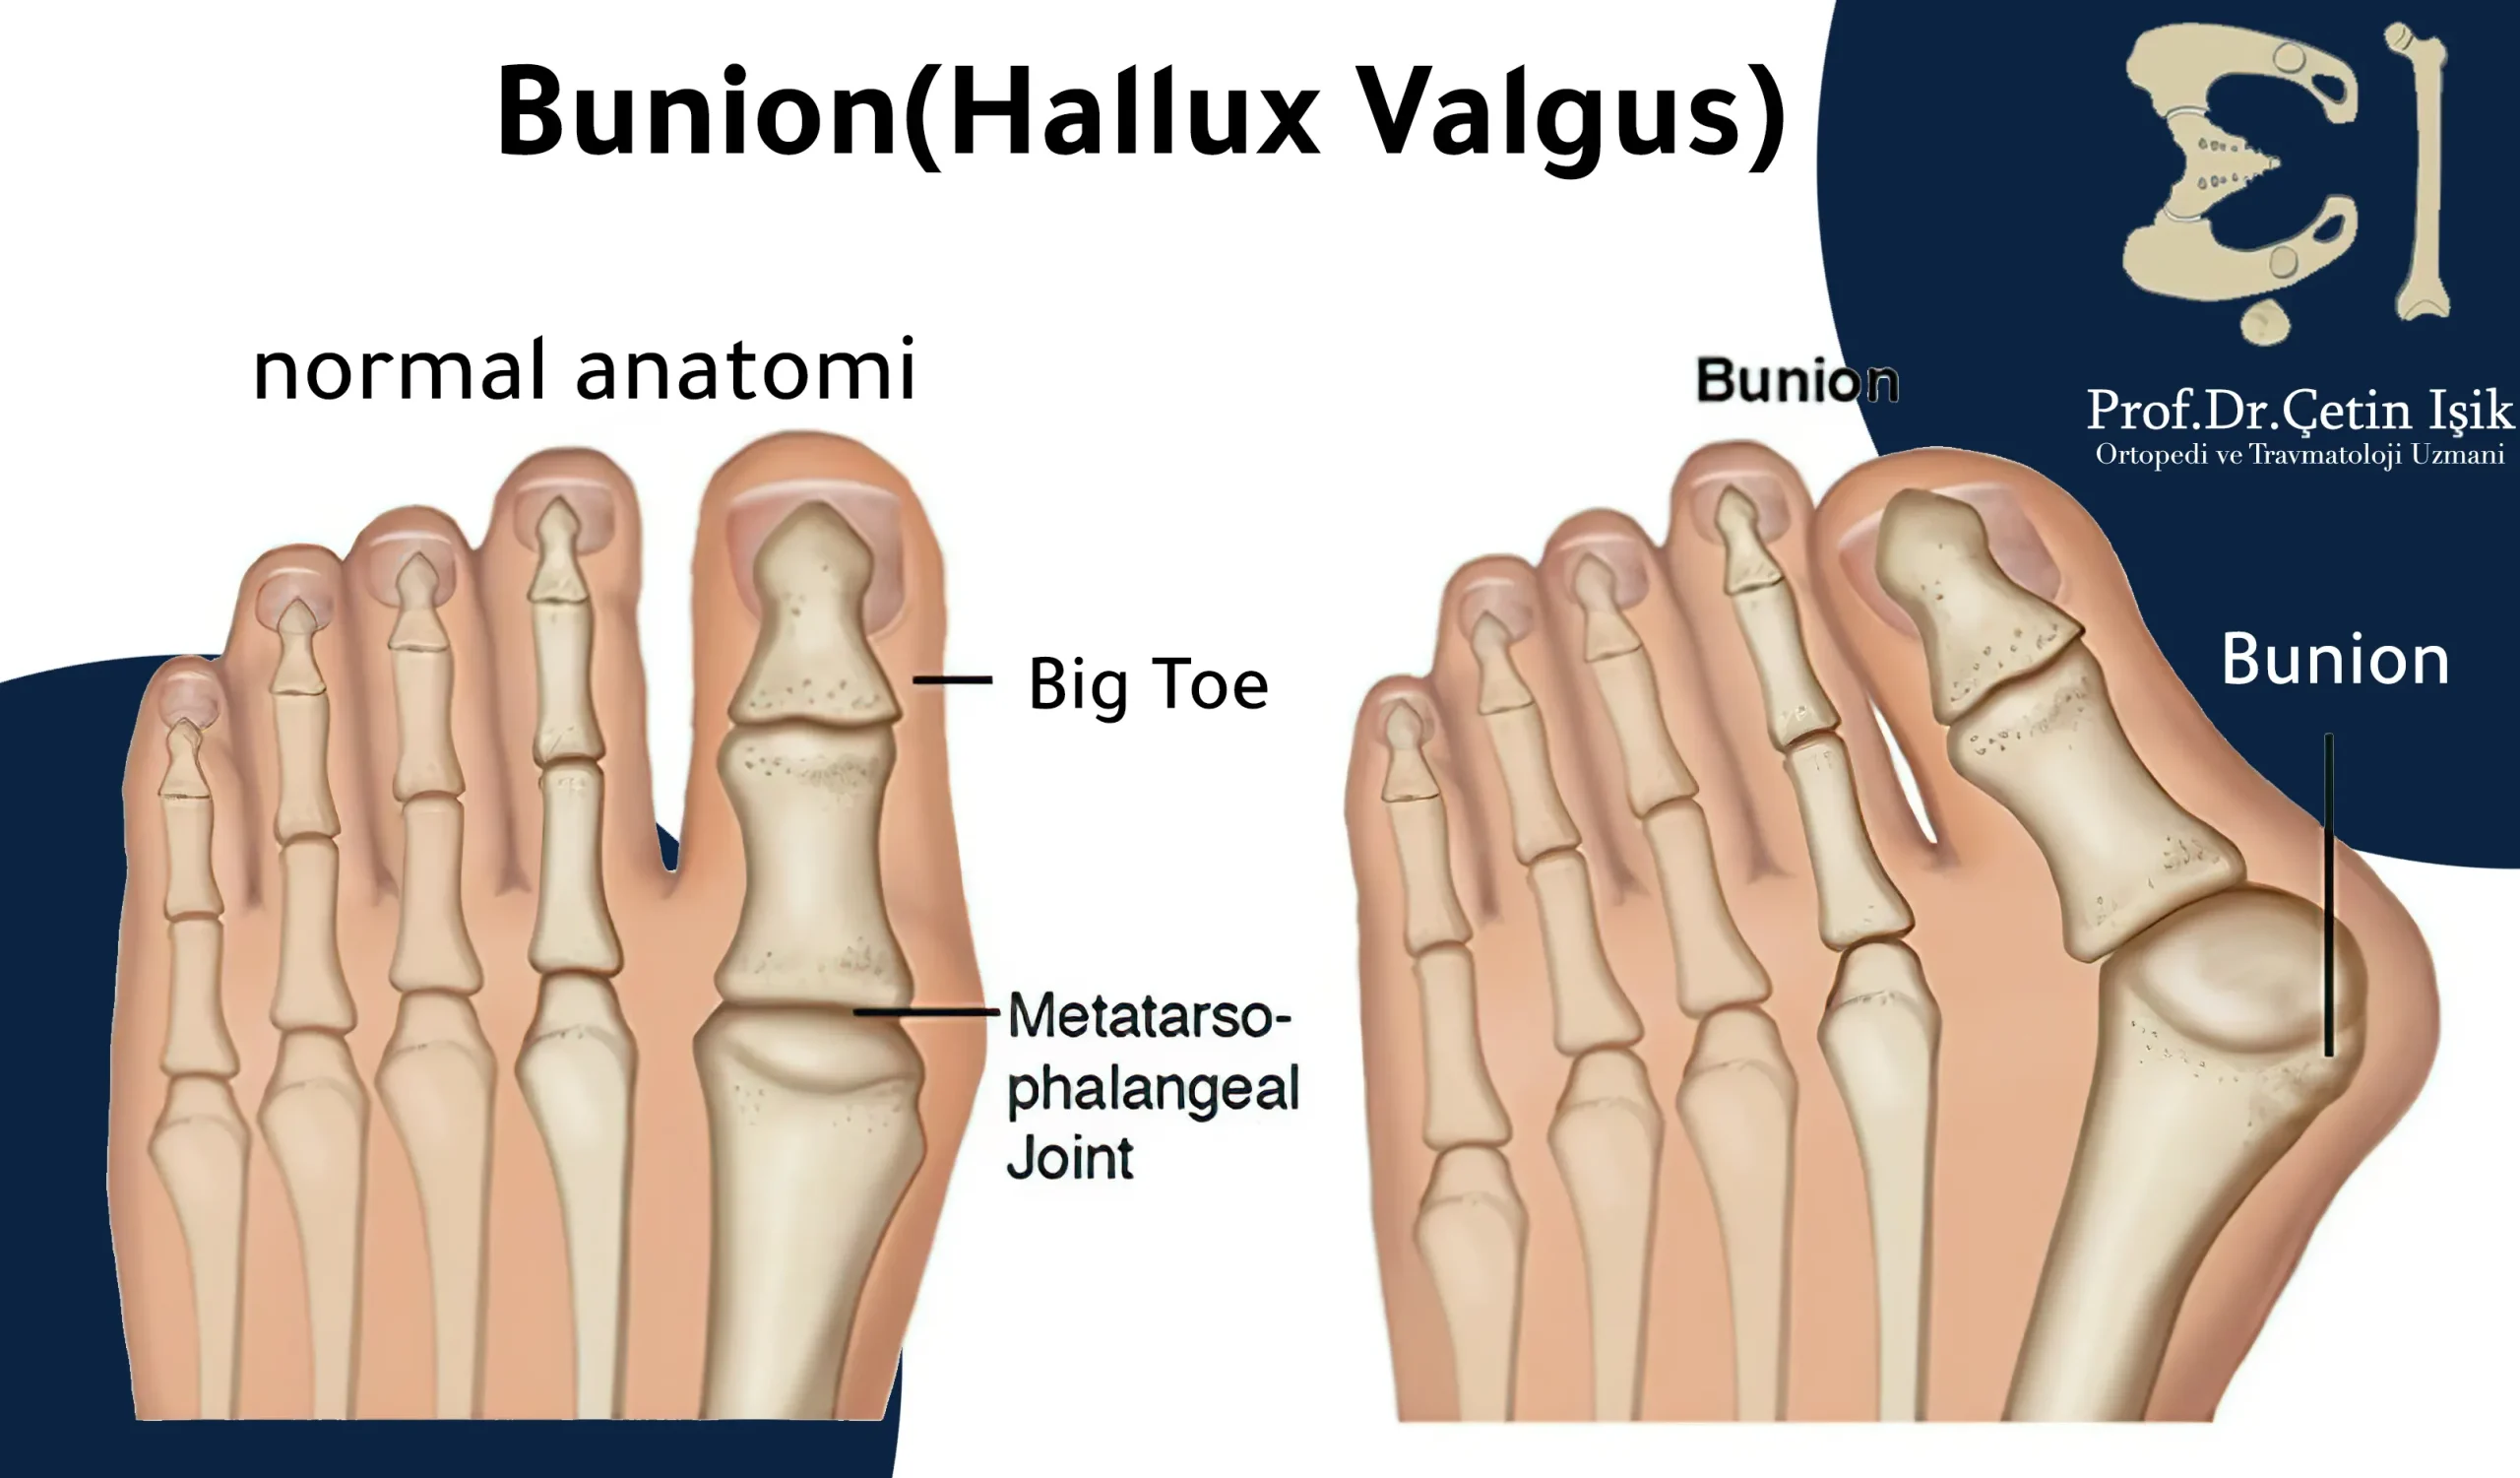 Difference between normal and hallux valgus foot